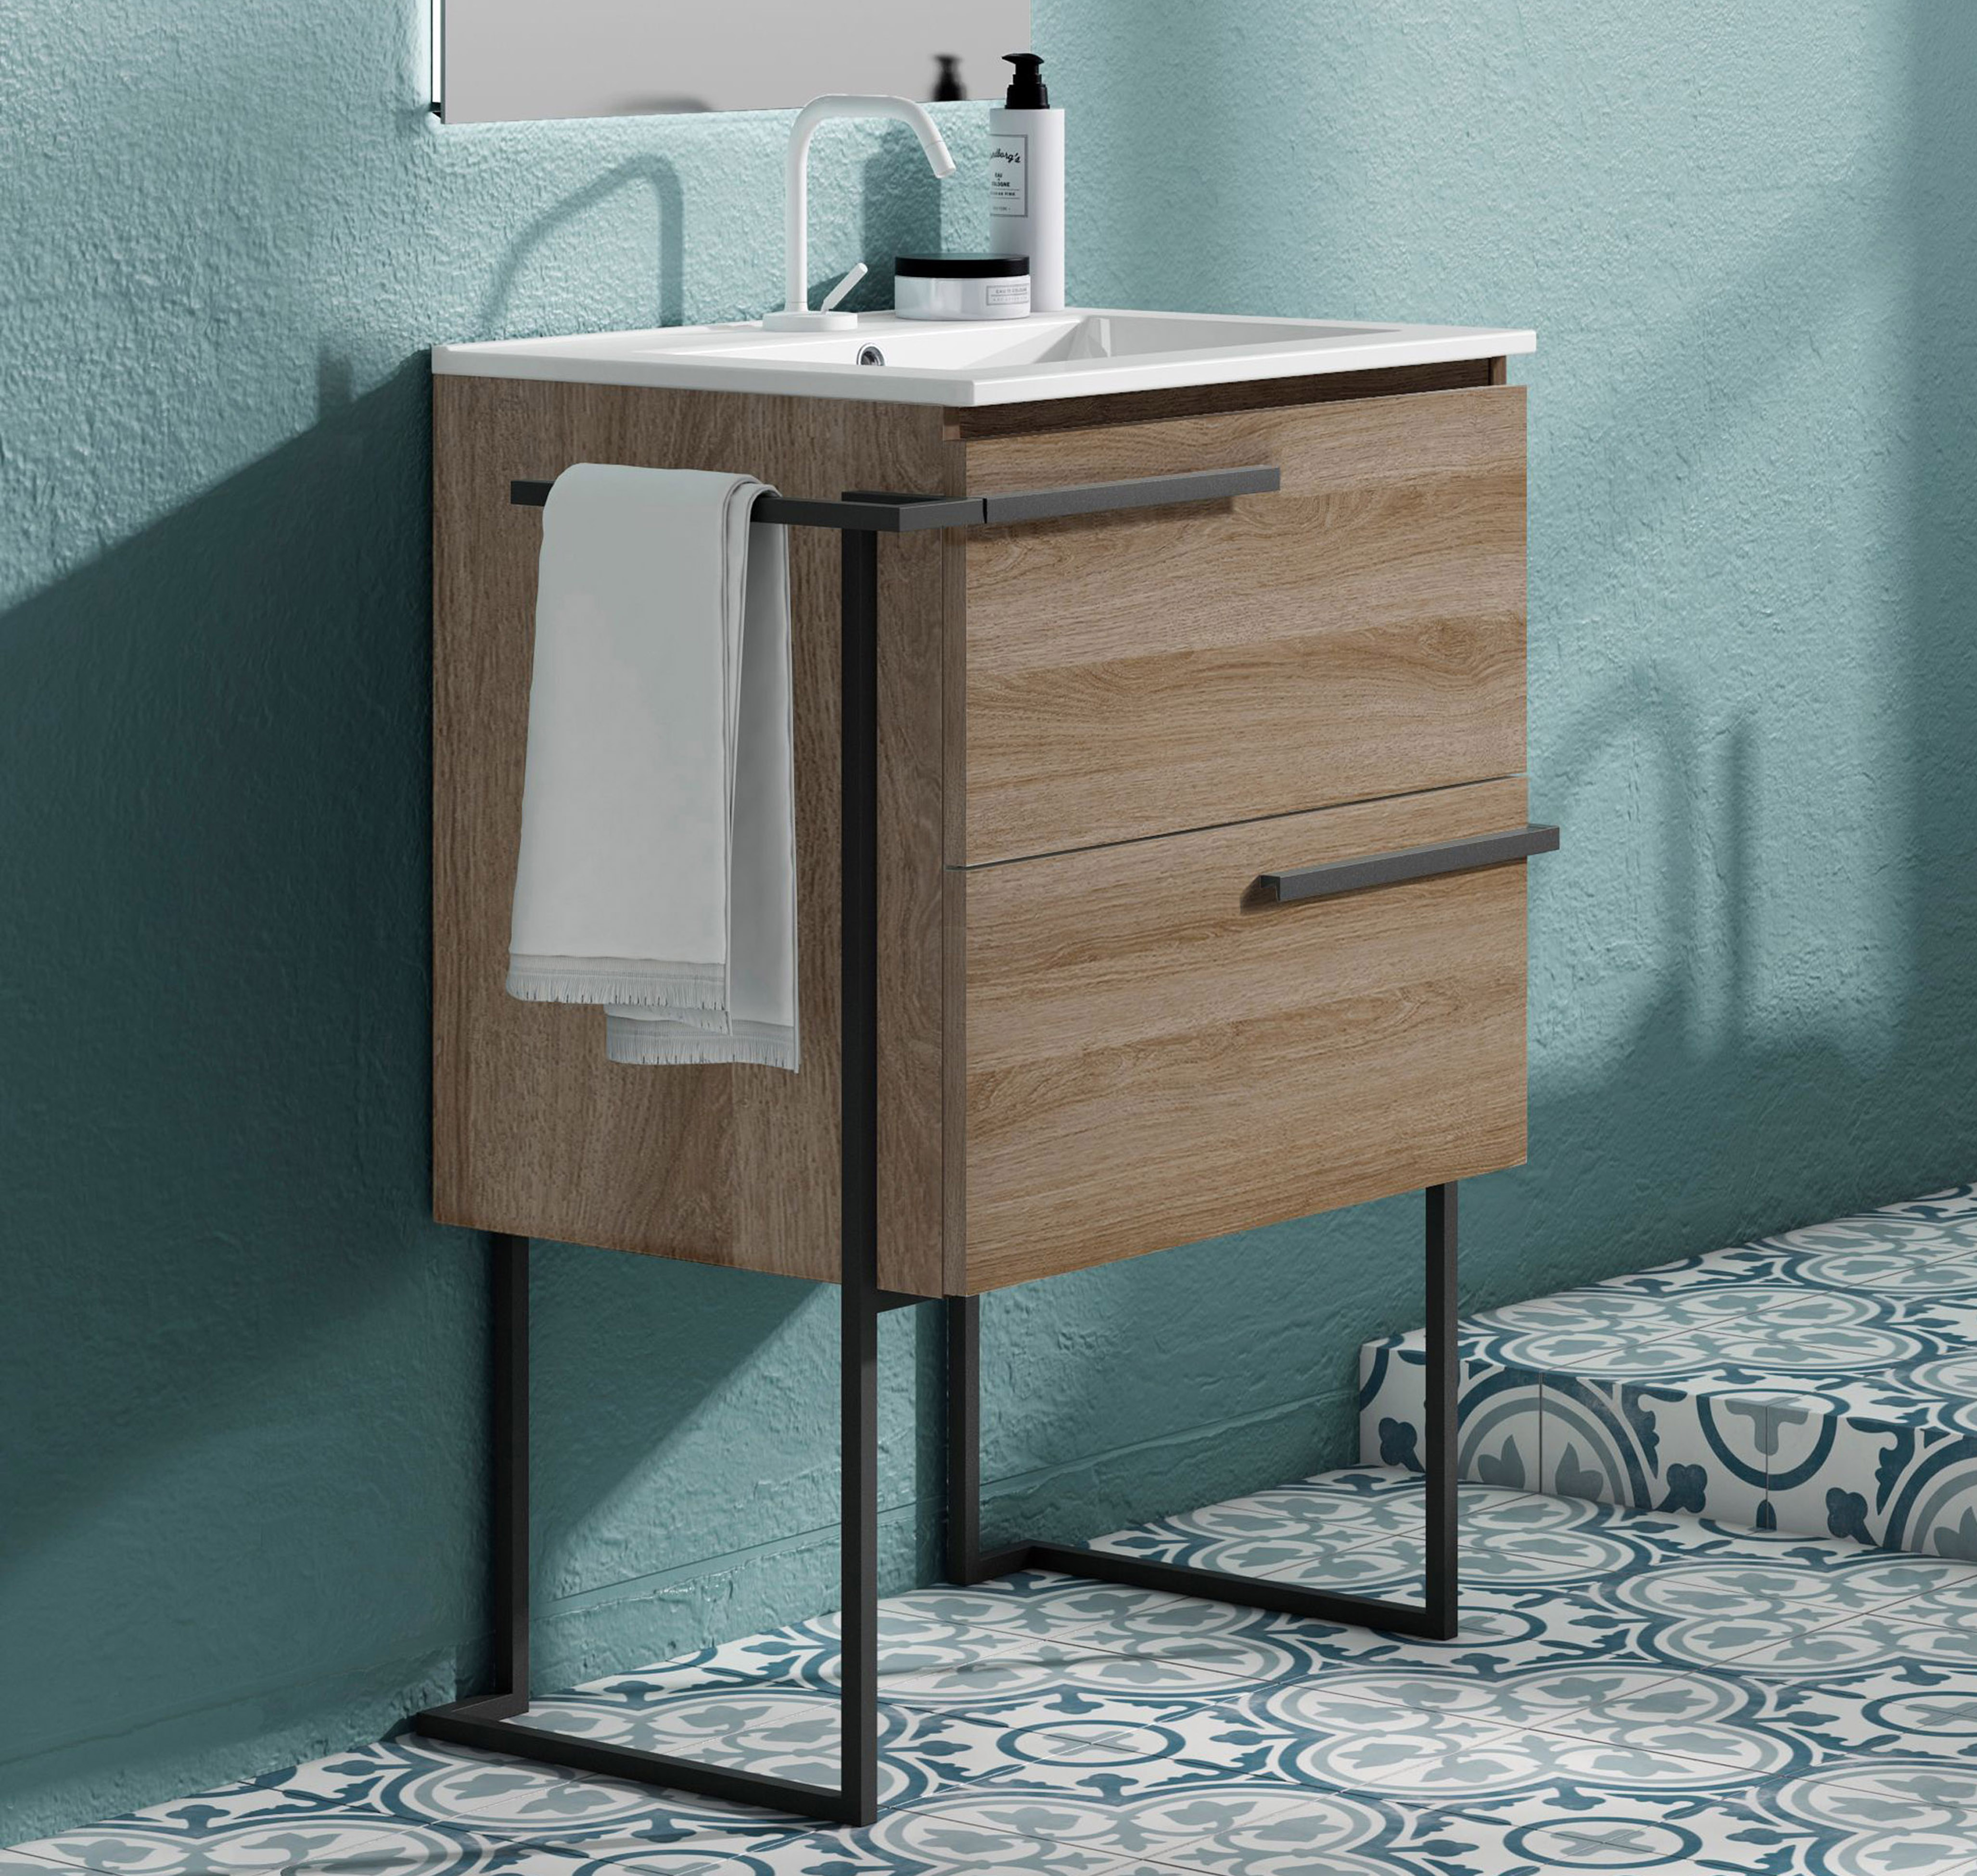 24" Single Sink Vanity 2 Drawer, Ceramic Sink with Metal Legs and Towel Bar and 4 Color Options